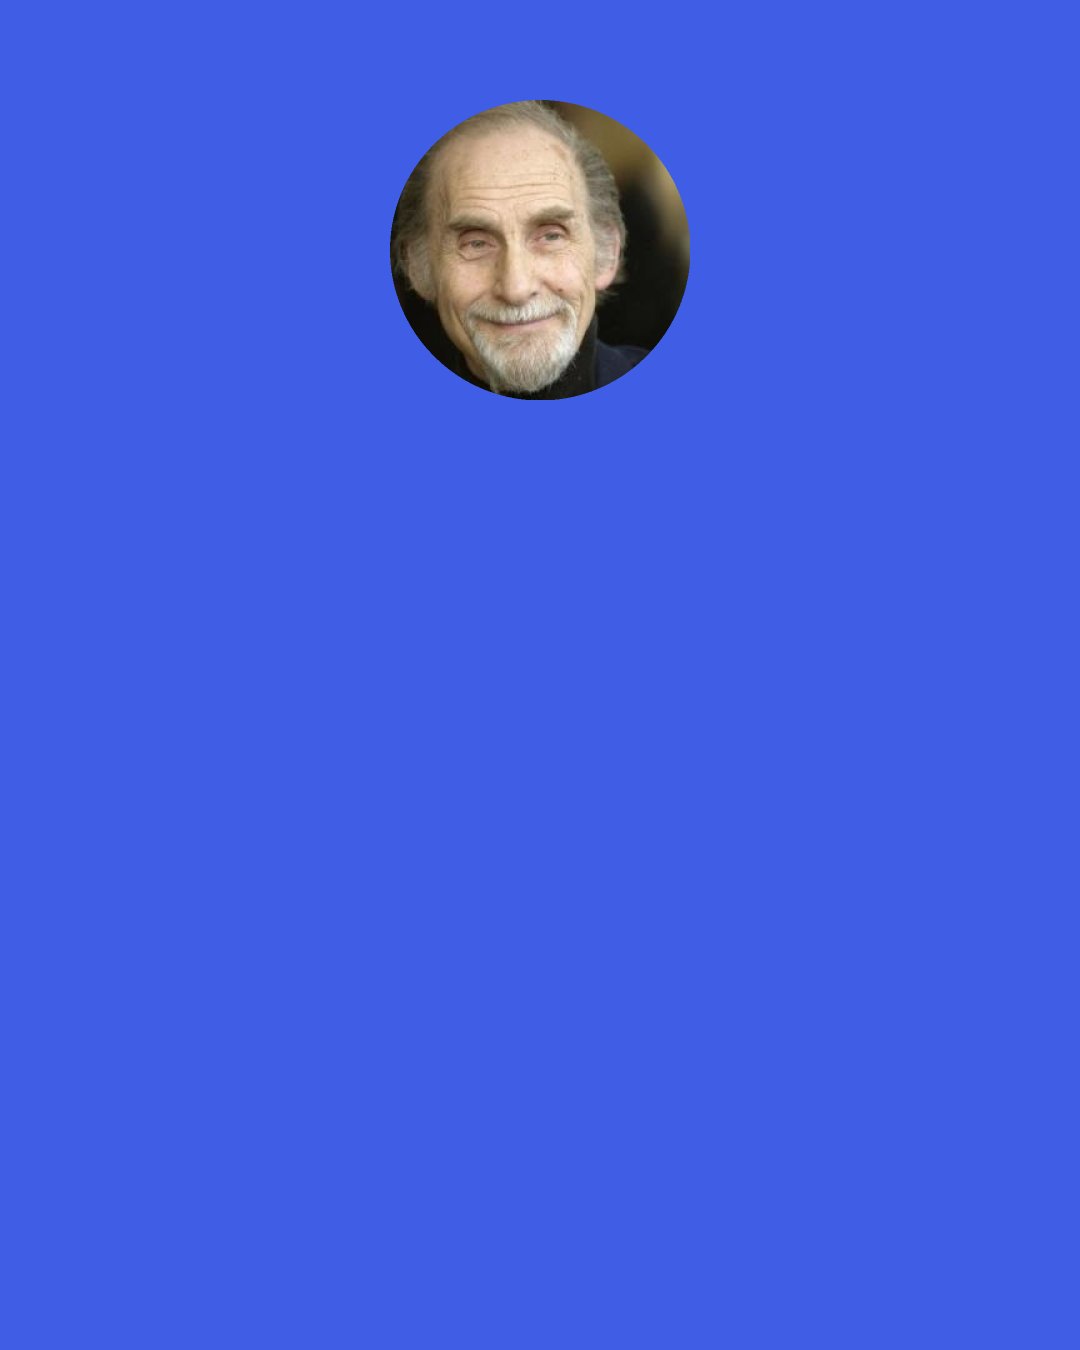 Sid Caesar: When I did comedy I made fun of myself. If there was a buffoon, I played the buffoon. And people looked at me and said, "Gee, that's like Uncle David", or "That's like a friend of mine.". And they related through that. I didn't make fun of them. I made fun of me.